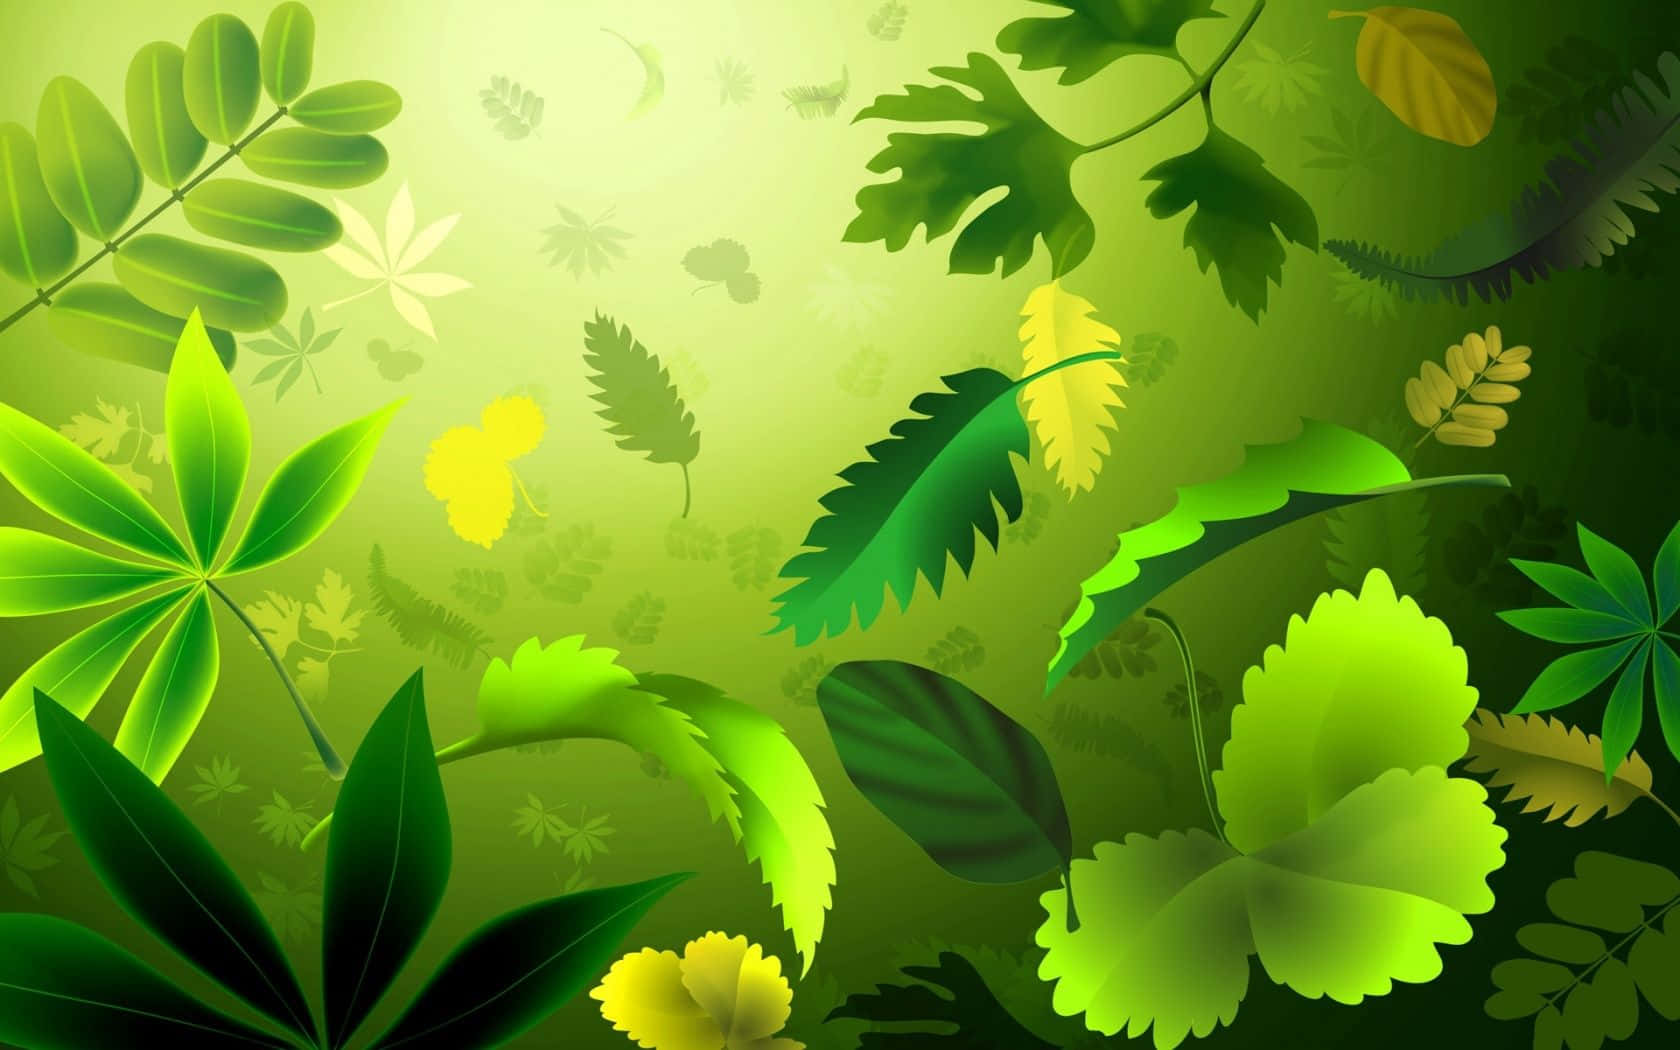 Green Leaves And Leaves In The Background Wallpaper